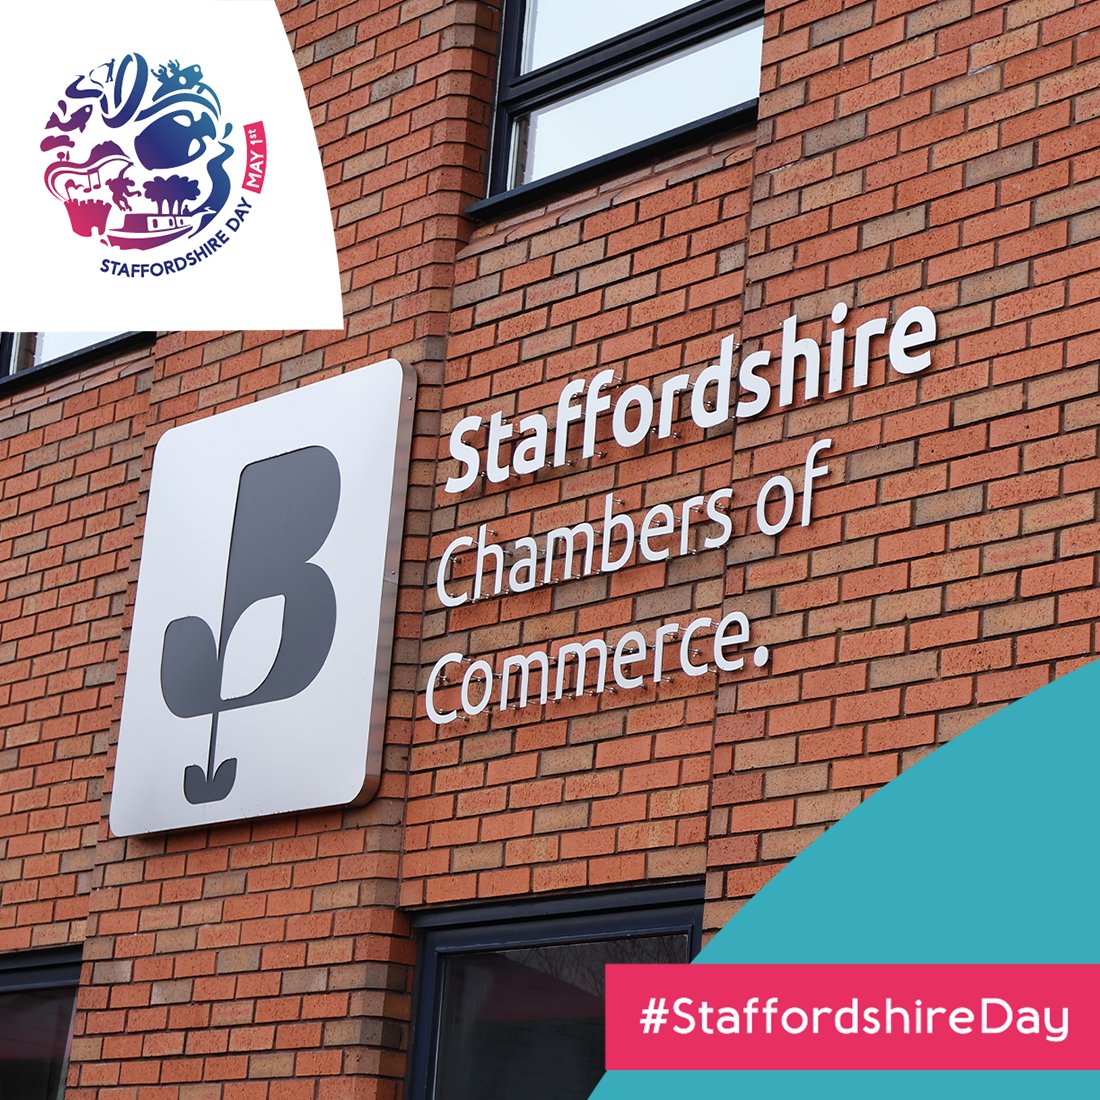 Happy #StaffordshireDay! 🎉 Staffordshire Chambers was founded in 1813, borne out of a desire from businesses to join together to represent common interests, network, trade and grow. To this day we are proud to continue to support businesses in Staffordshire - a brilliant…